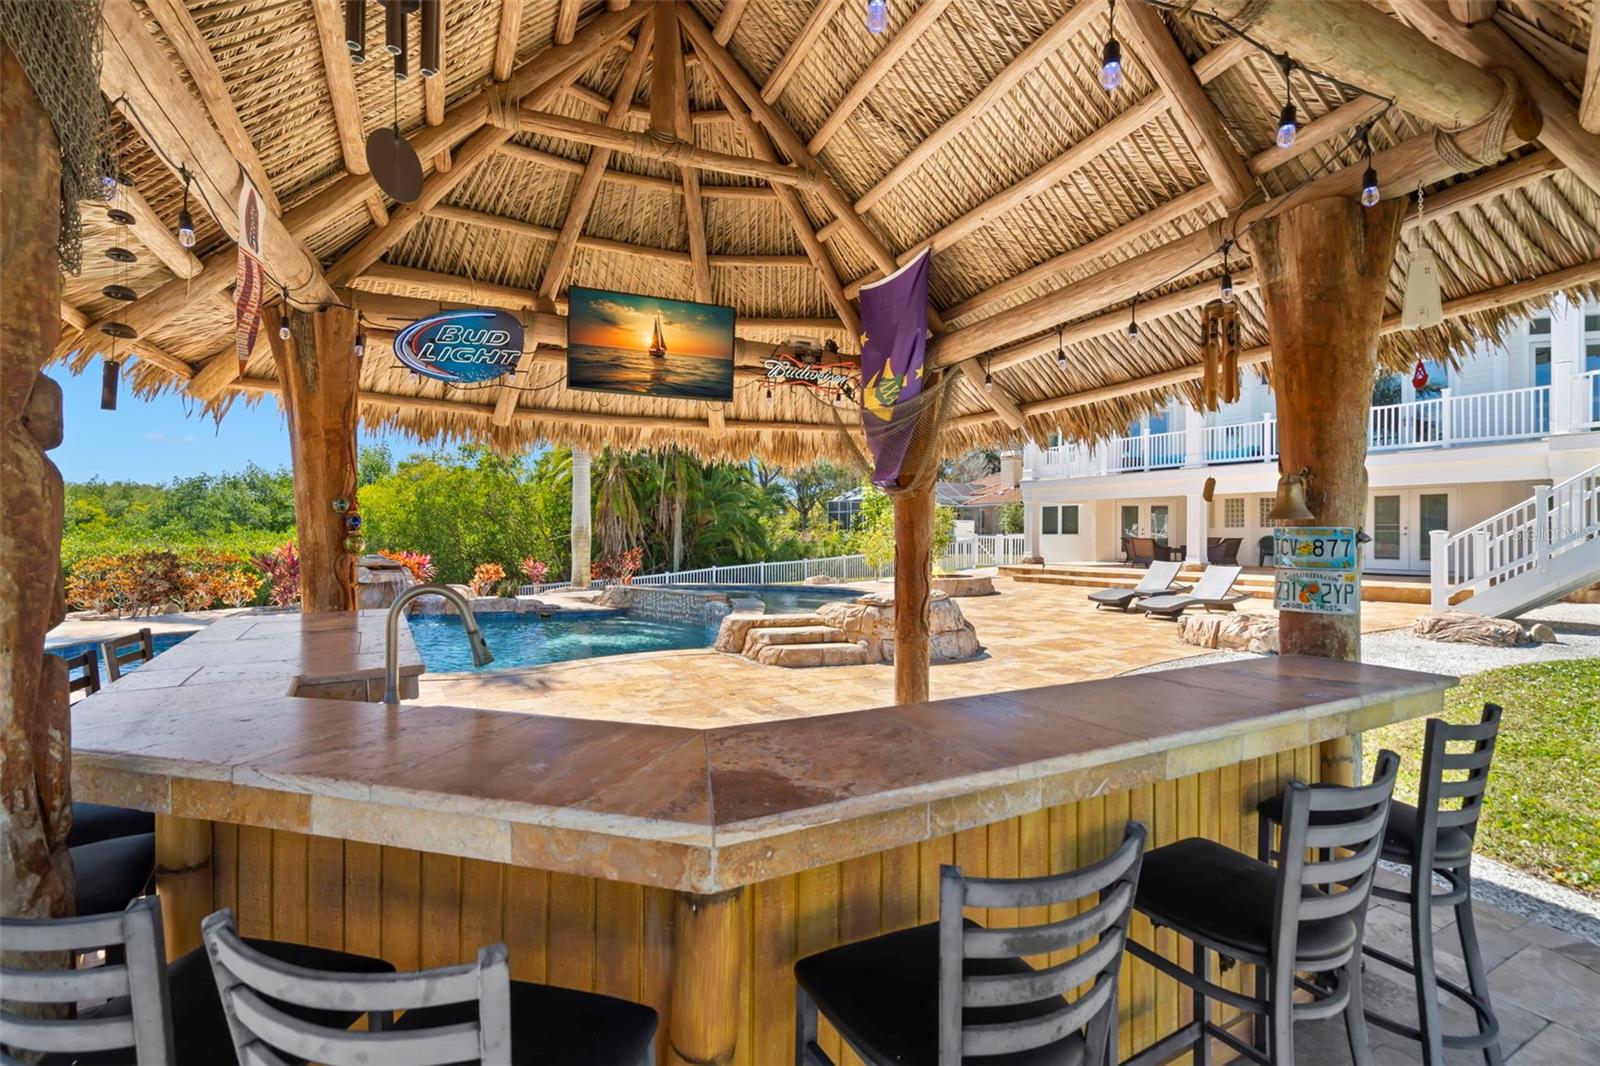 The tiki bar is a great place to host your guests for a game and pool party.